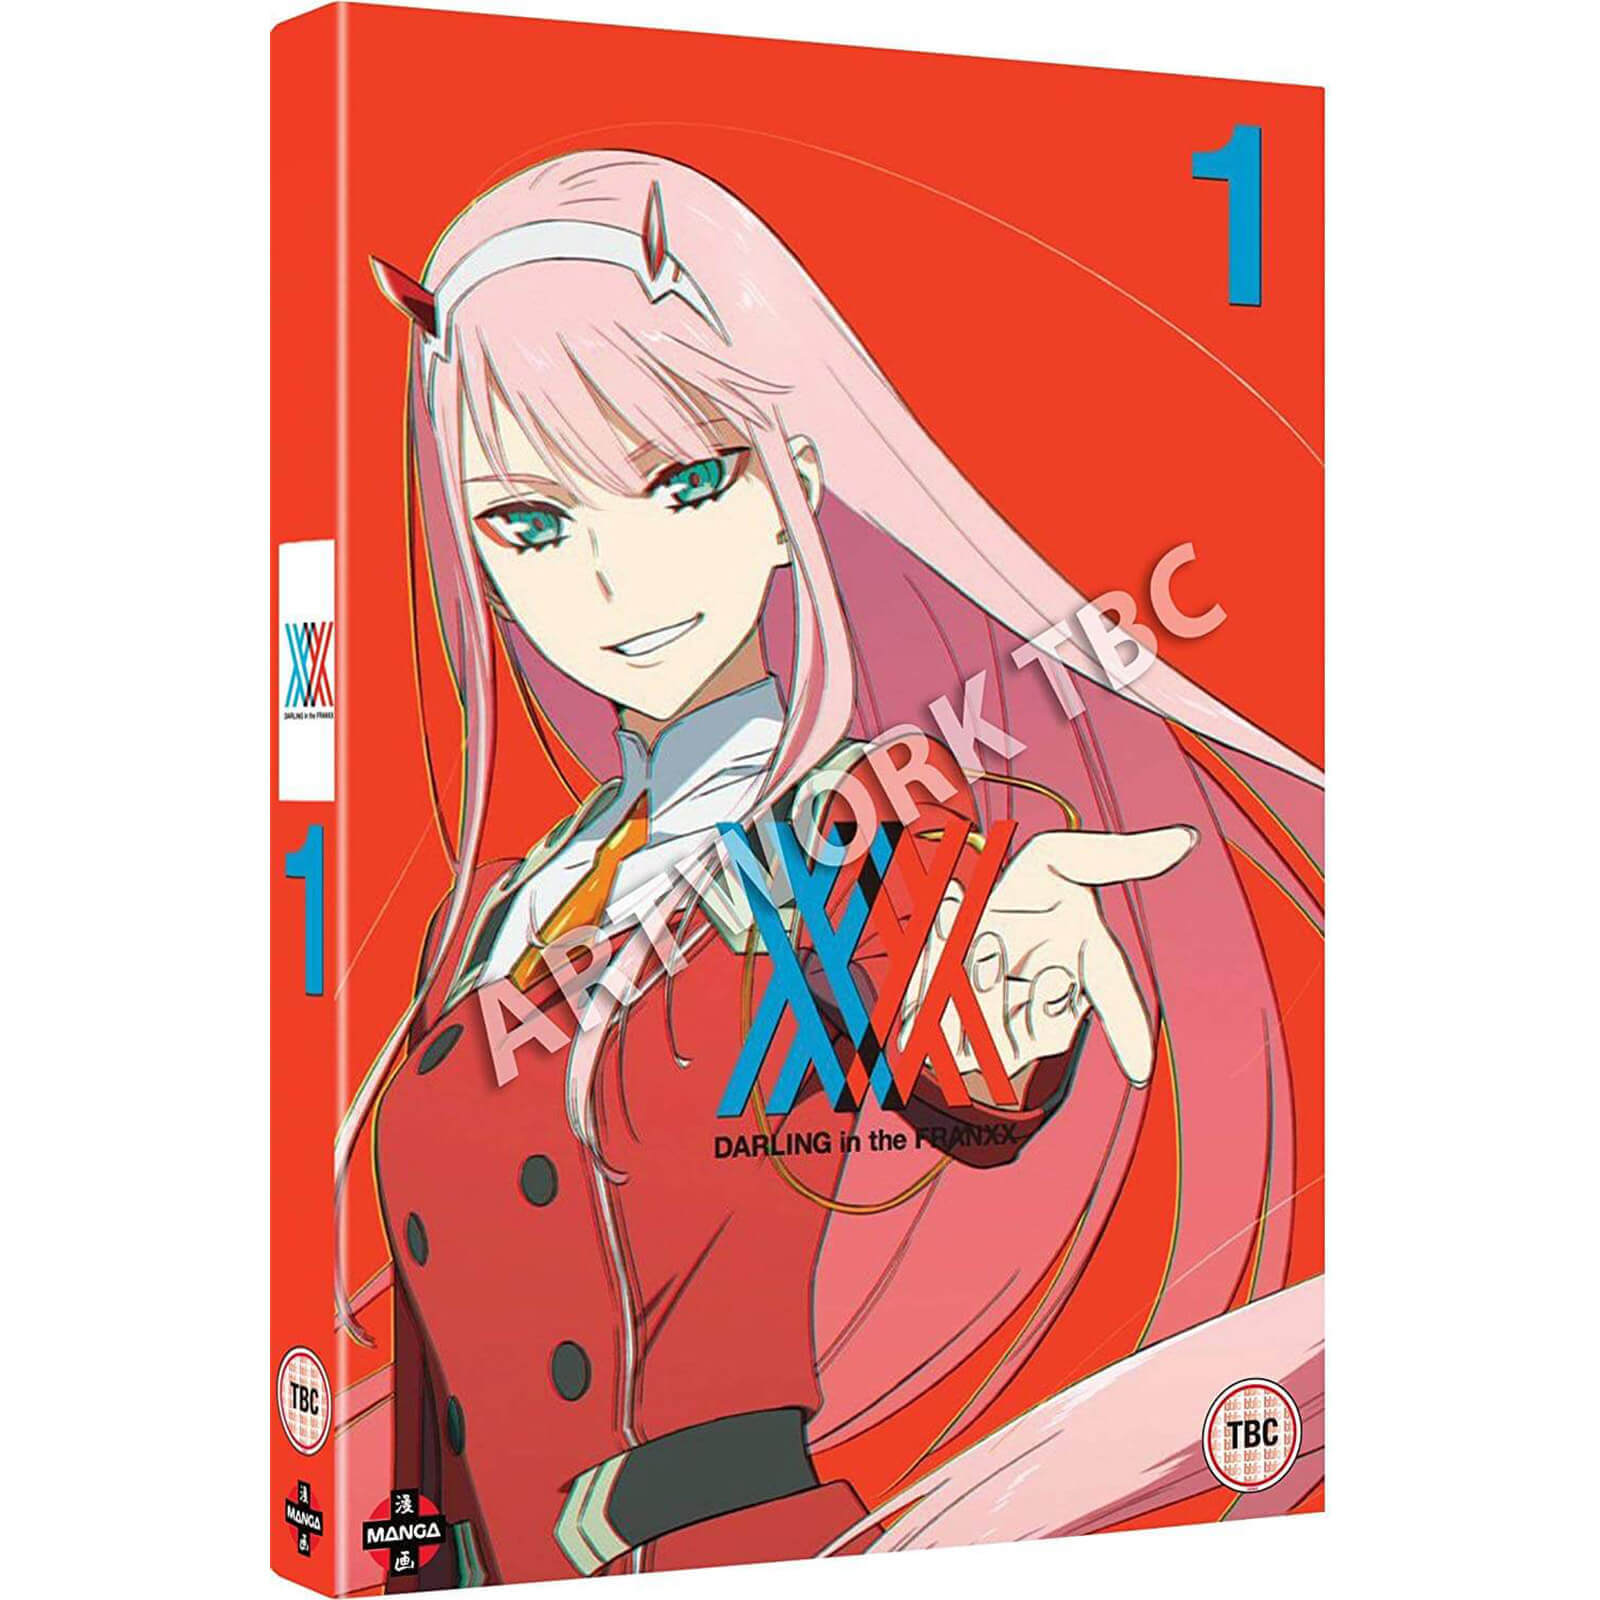 DARLING in the FRANXX - Part One